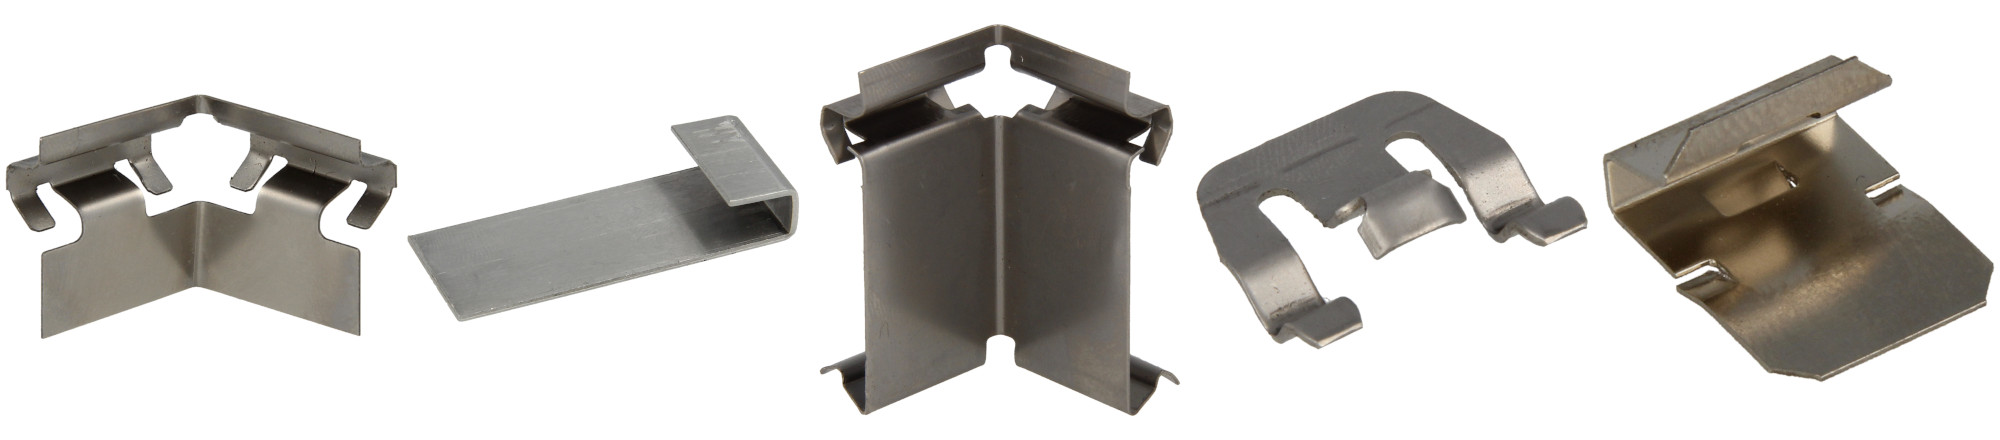 Ridge, calf and glass mounting parts